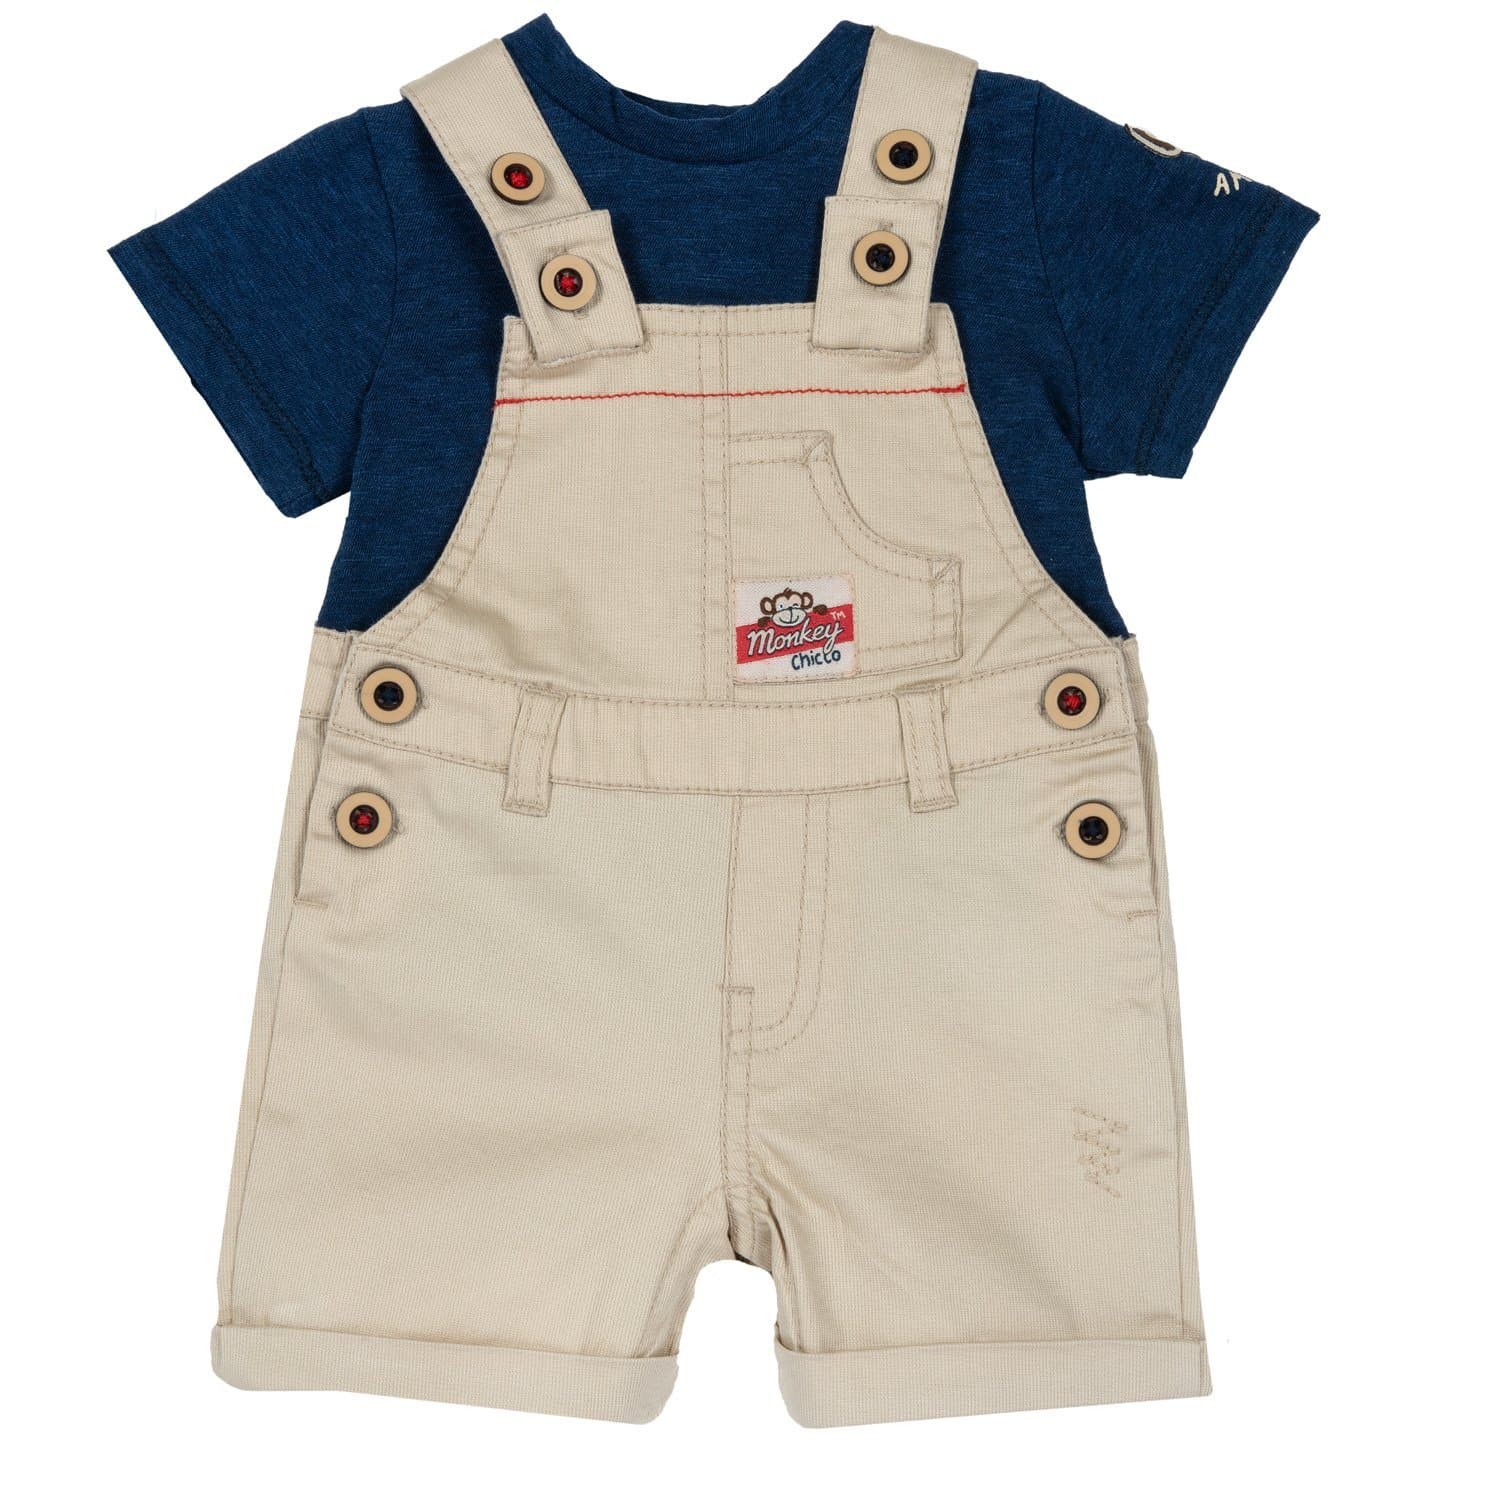 Chicco-T-Shirt-and-Short-Overalls-Set-Natural-09075535000000-061-050